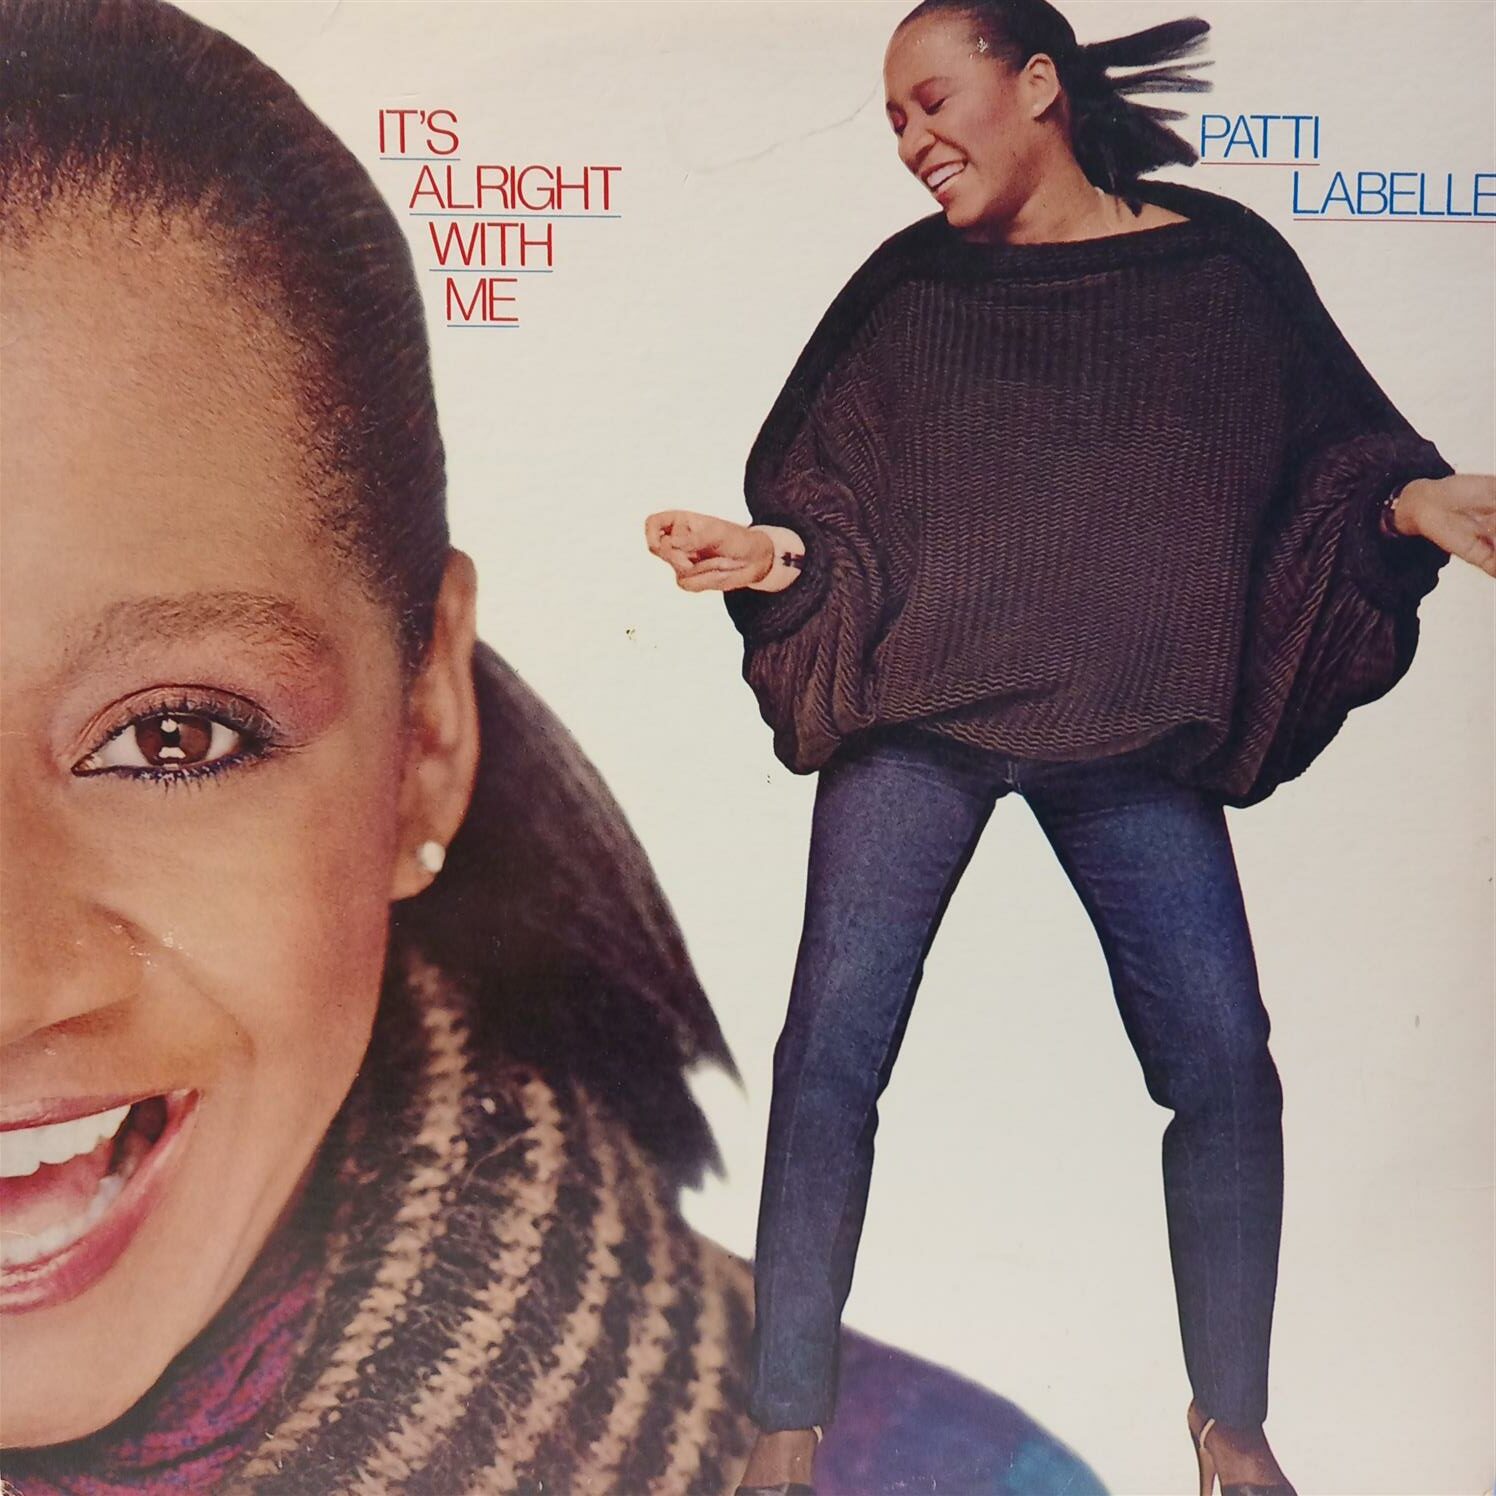 PATTI LABELLE – IT’S ALRIGHT WITH ME ON